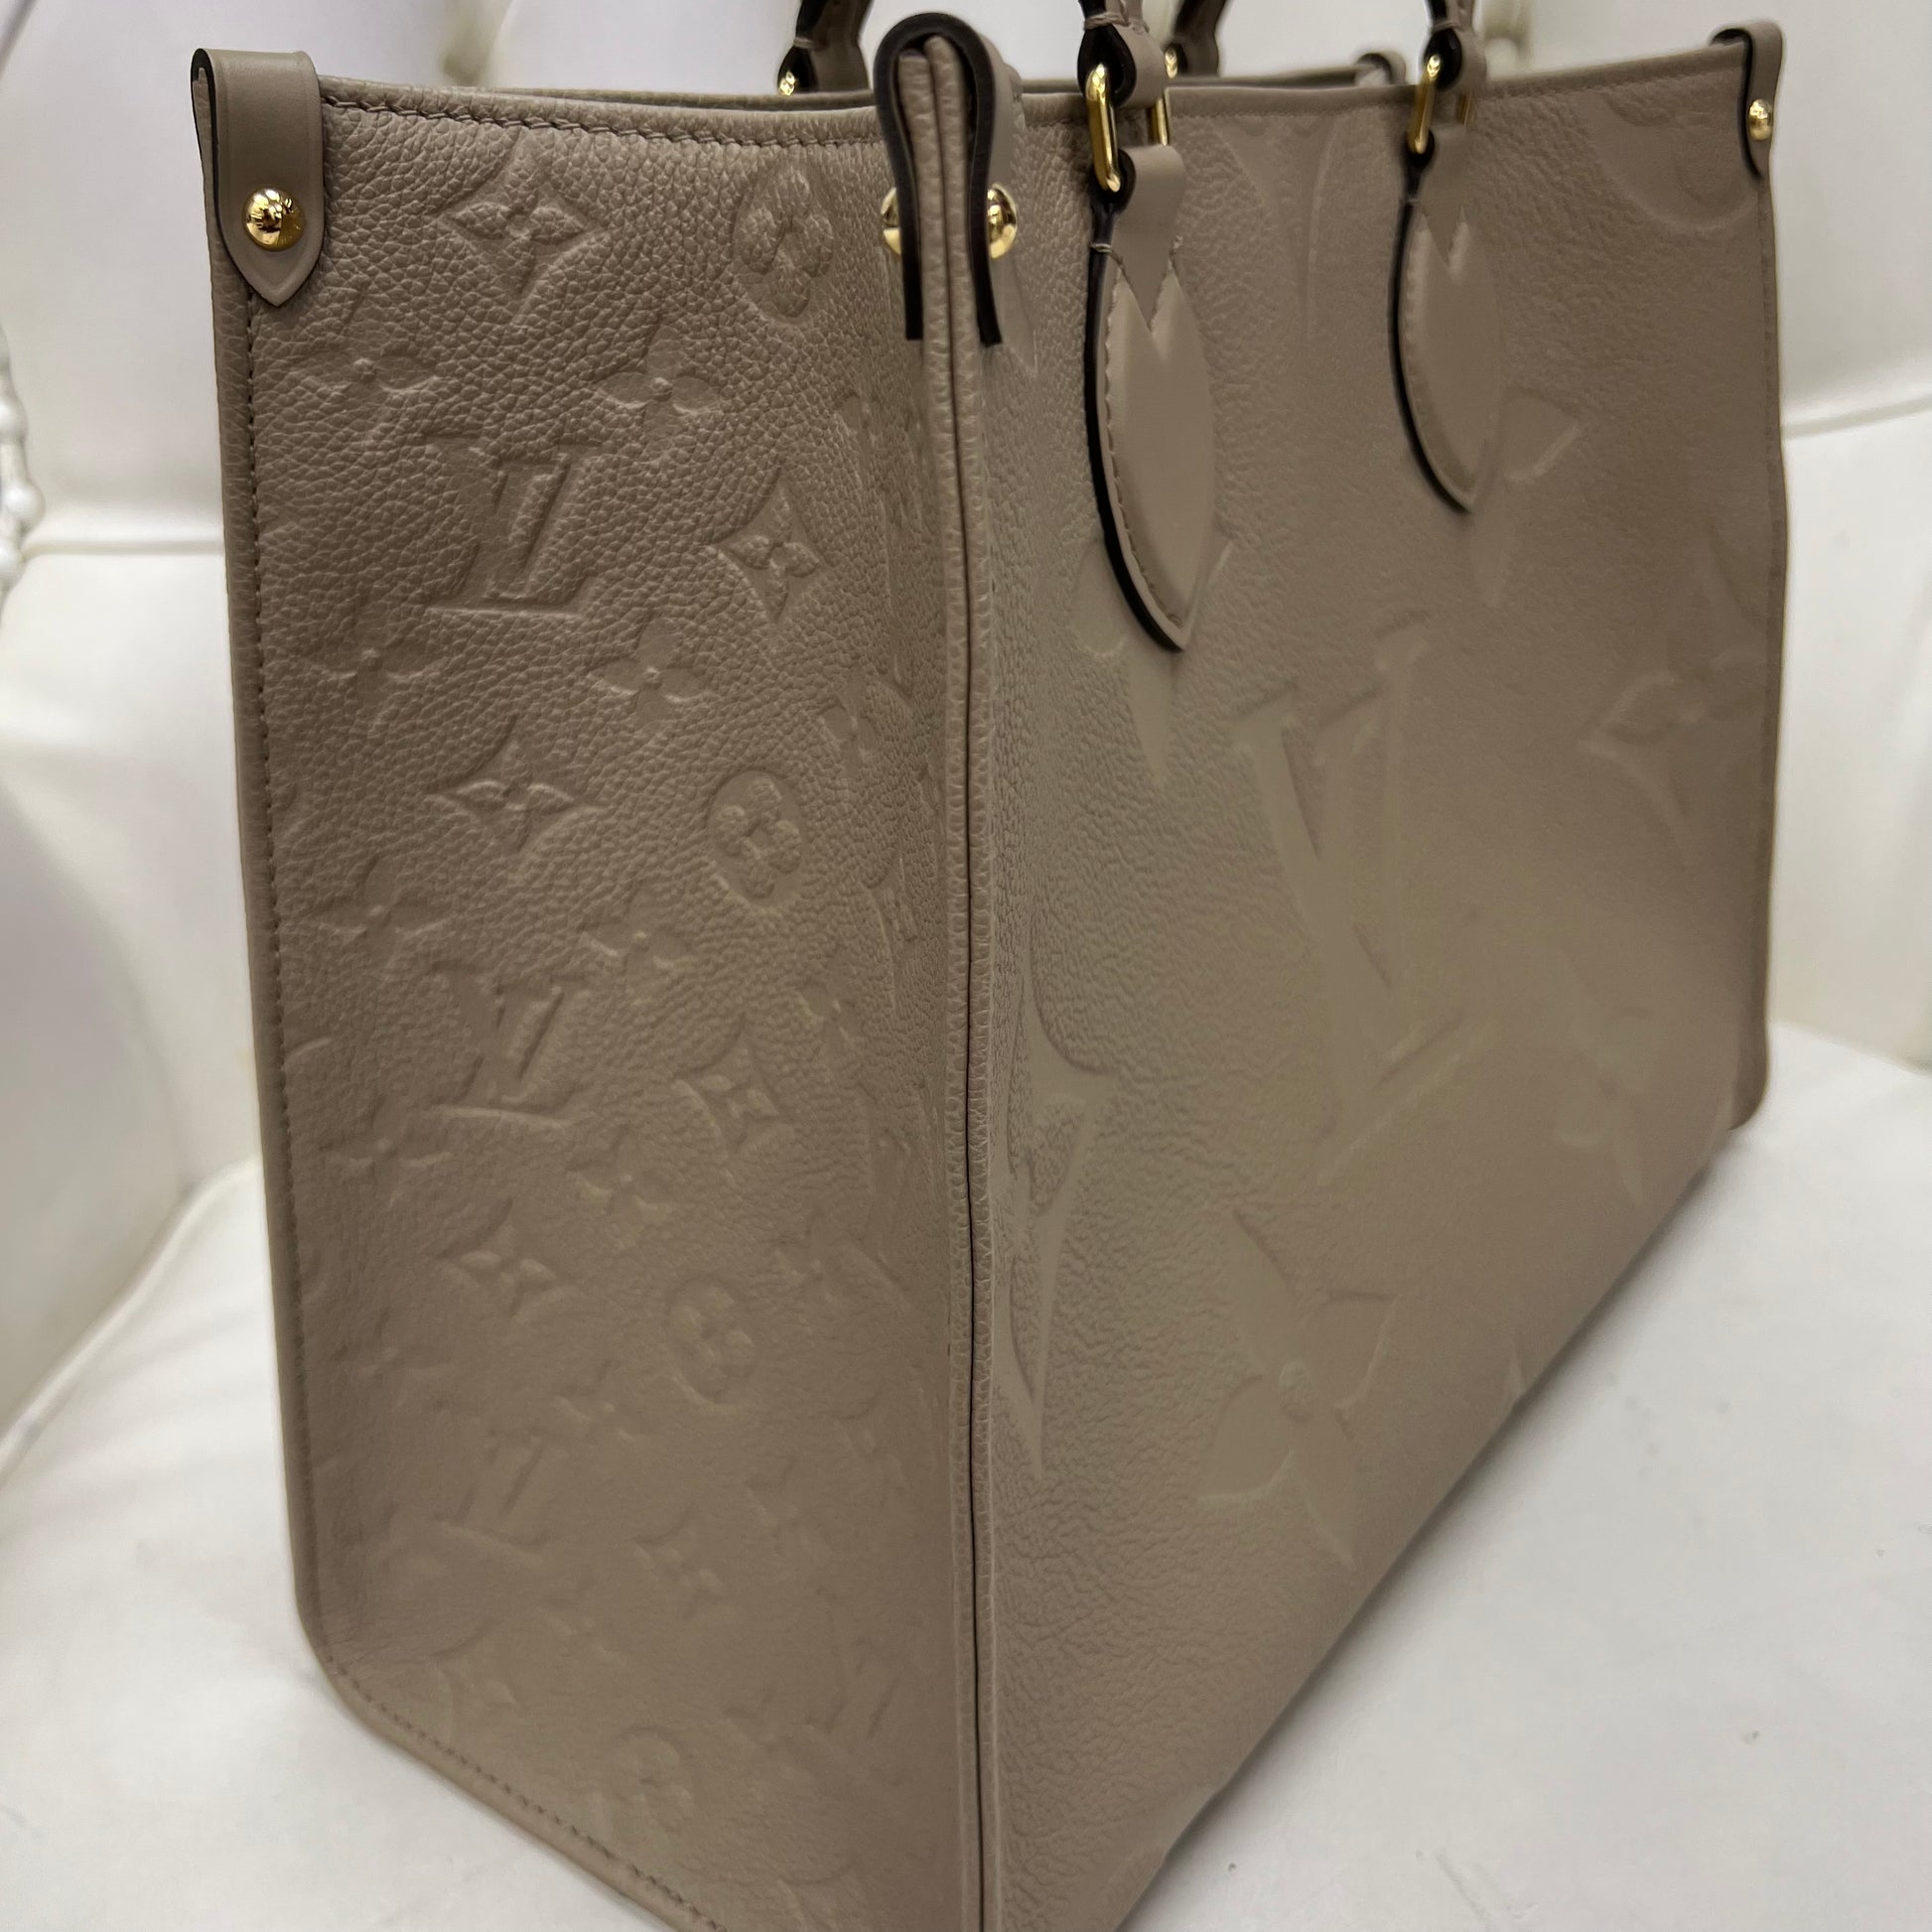 Did some retail therapy! OTG empreinte in Turtledove with a matching belt  and wallet. : r/Louisvuitton